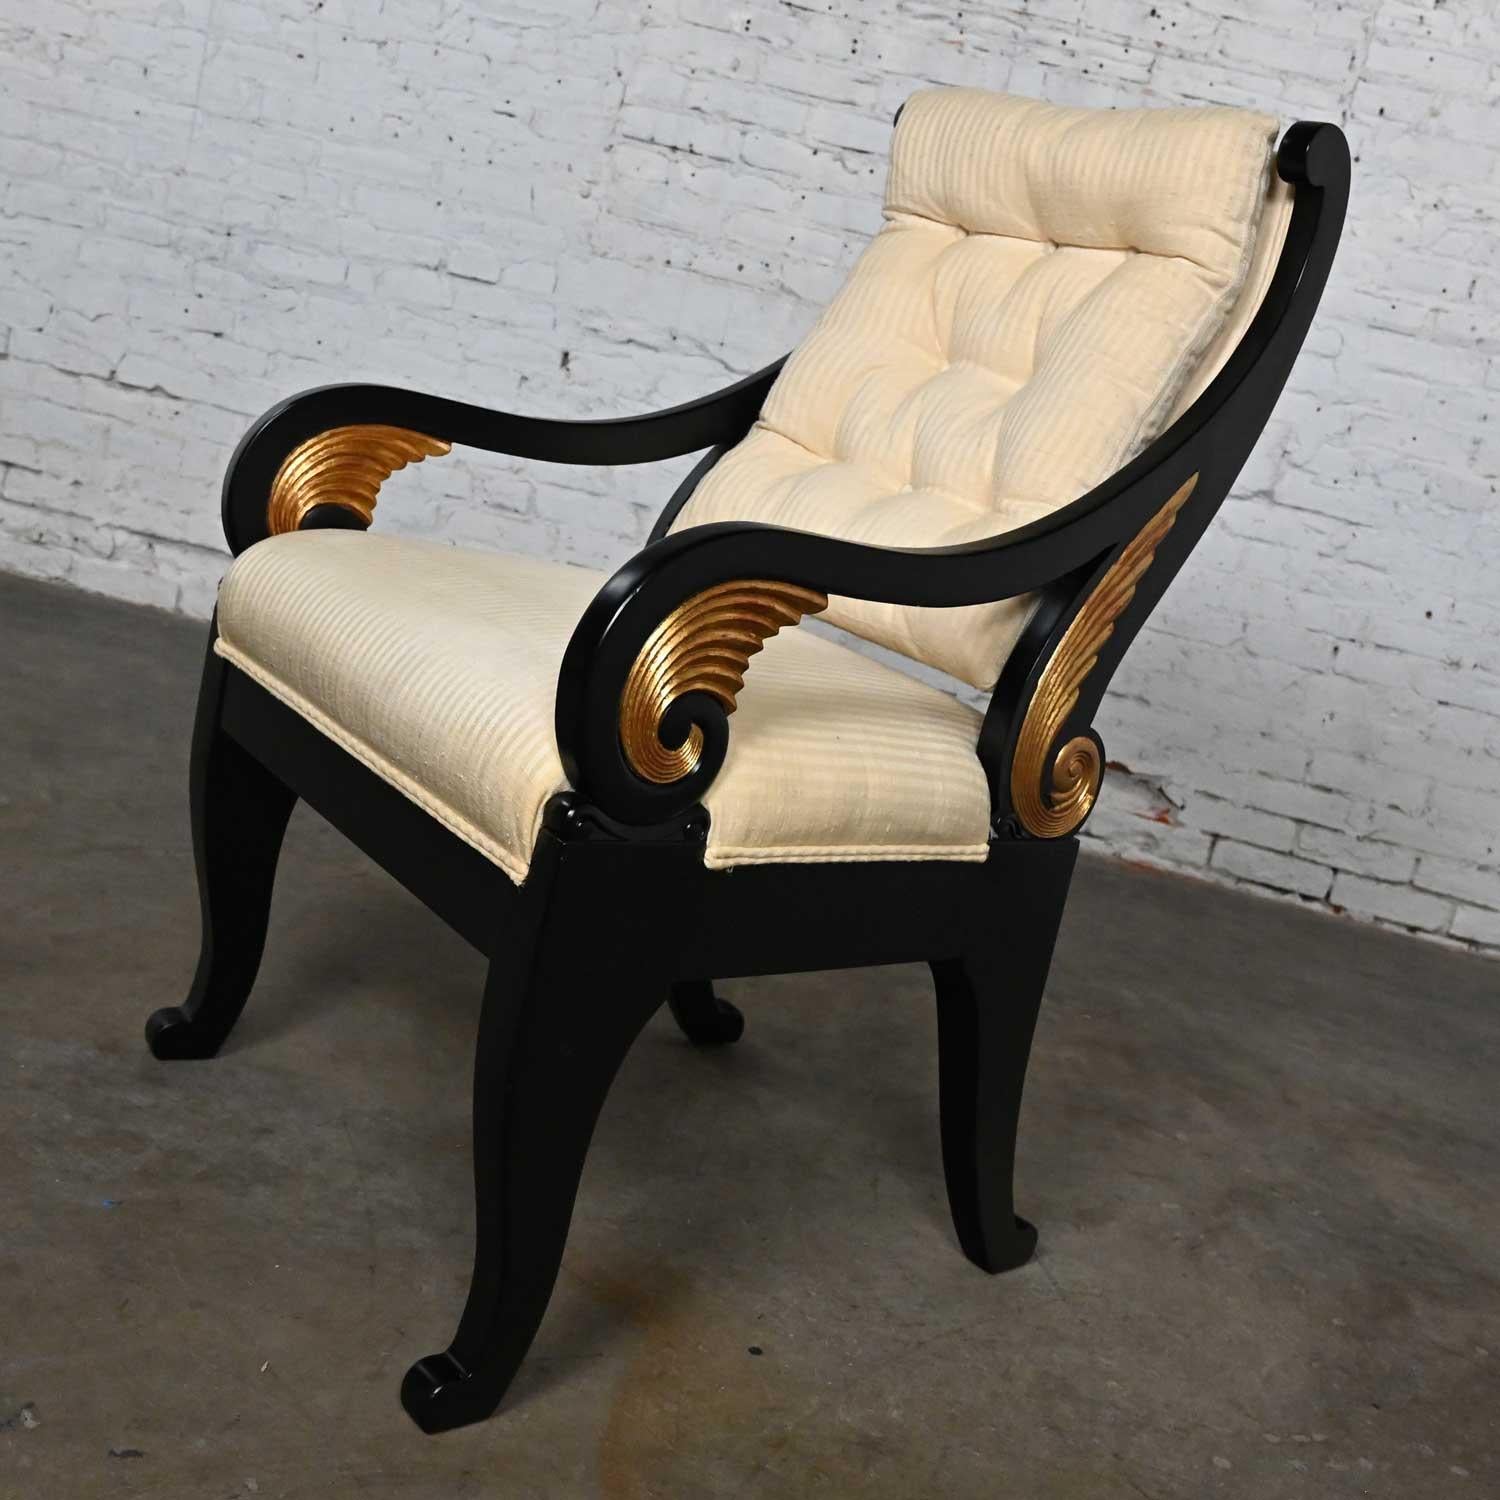 Neoclassical Revival Late 20th Neoclassic Revival Black Side Chair Gilt Wing Accents Off-White Fabric For Sale